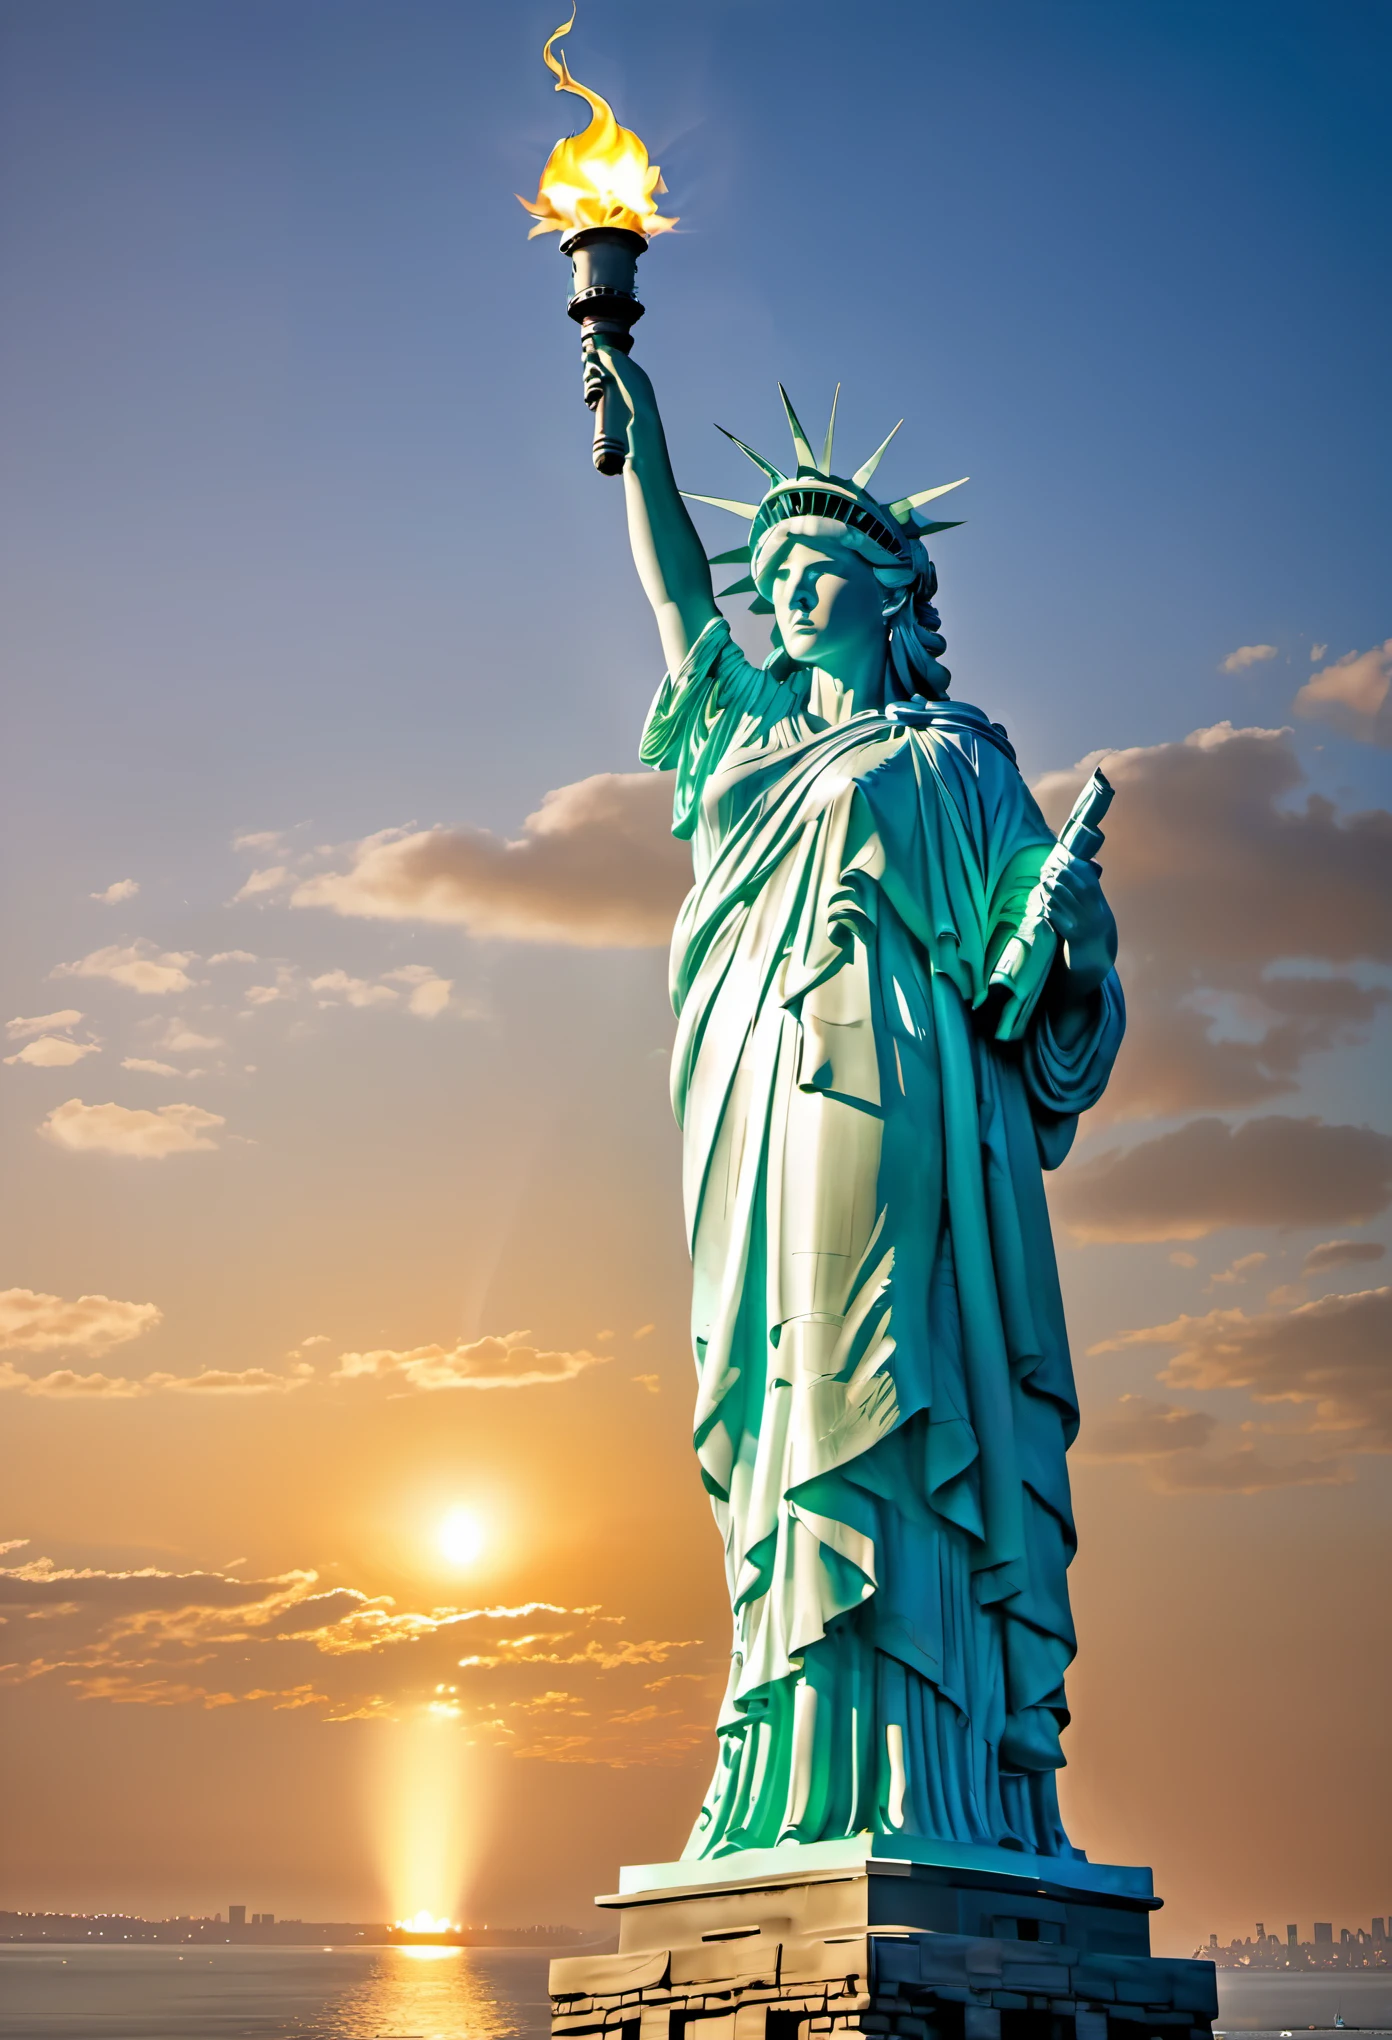 statue of Liberty holding a torch in the air, statue of Liberty, photo of the statue of Liberty, the goddess statue, goddess statue at left, represent, goddess statue sitting pose, on the island, nice images, lit in the light of dawn, new york background, beautiful scenery, stylized photo, Robert Scott Lauder